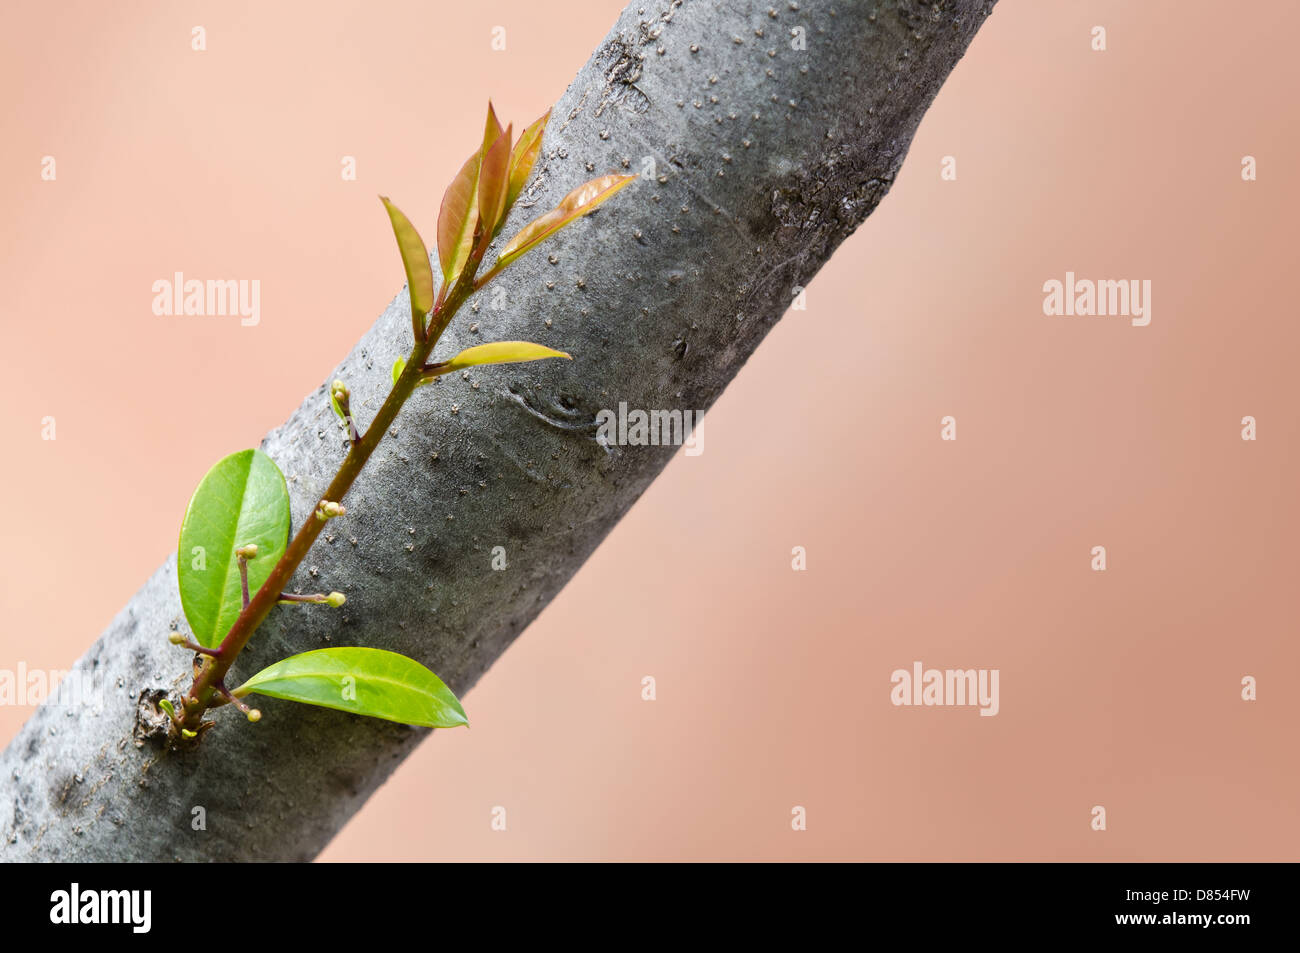 New sprout growing from tree trunk in spring. Concept new beginning and growth. Stock Photo